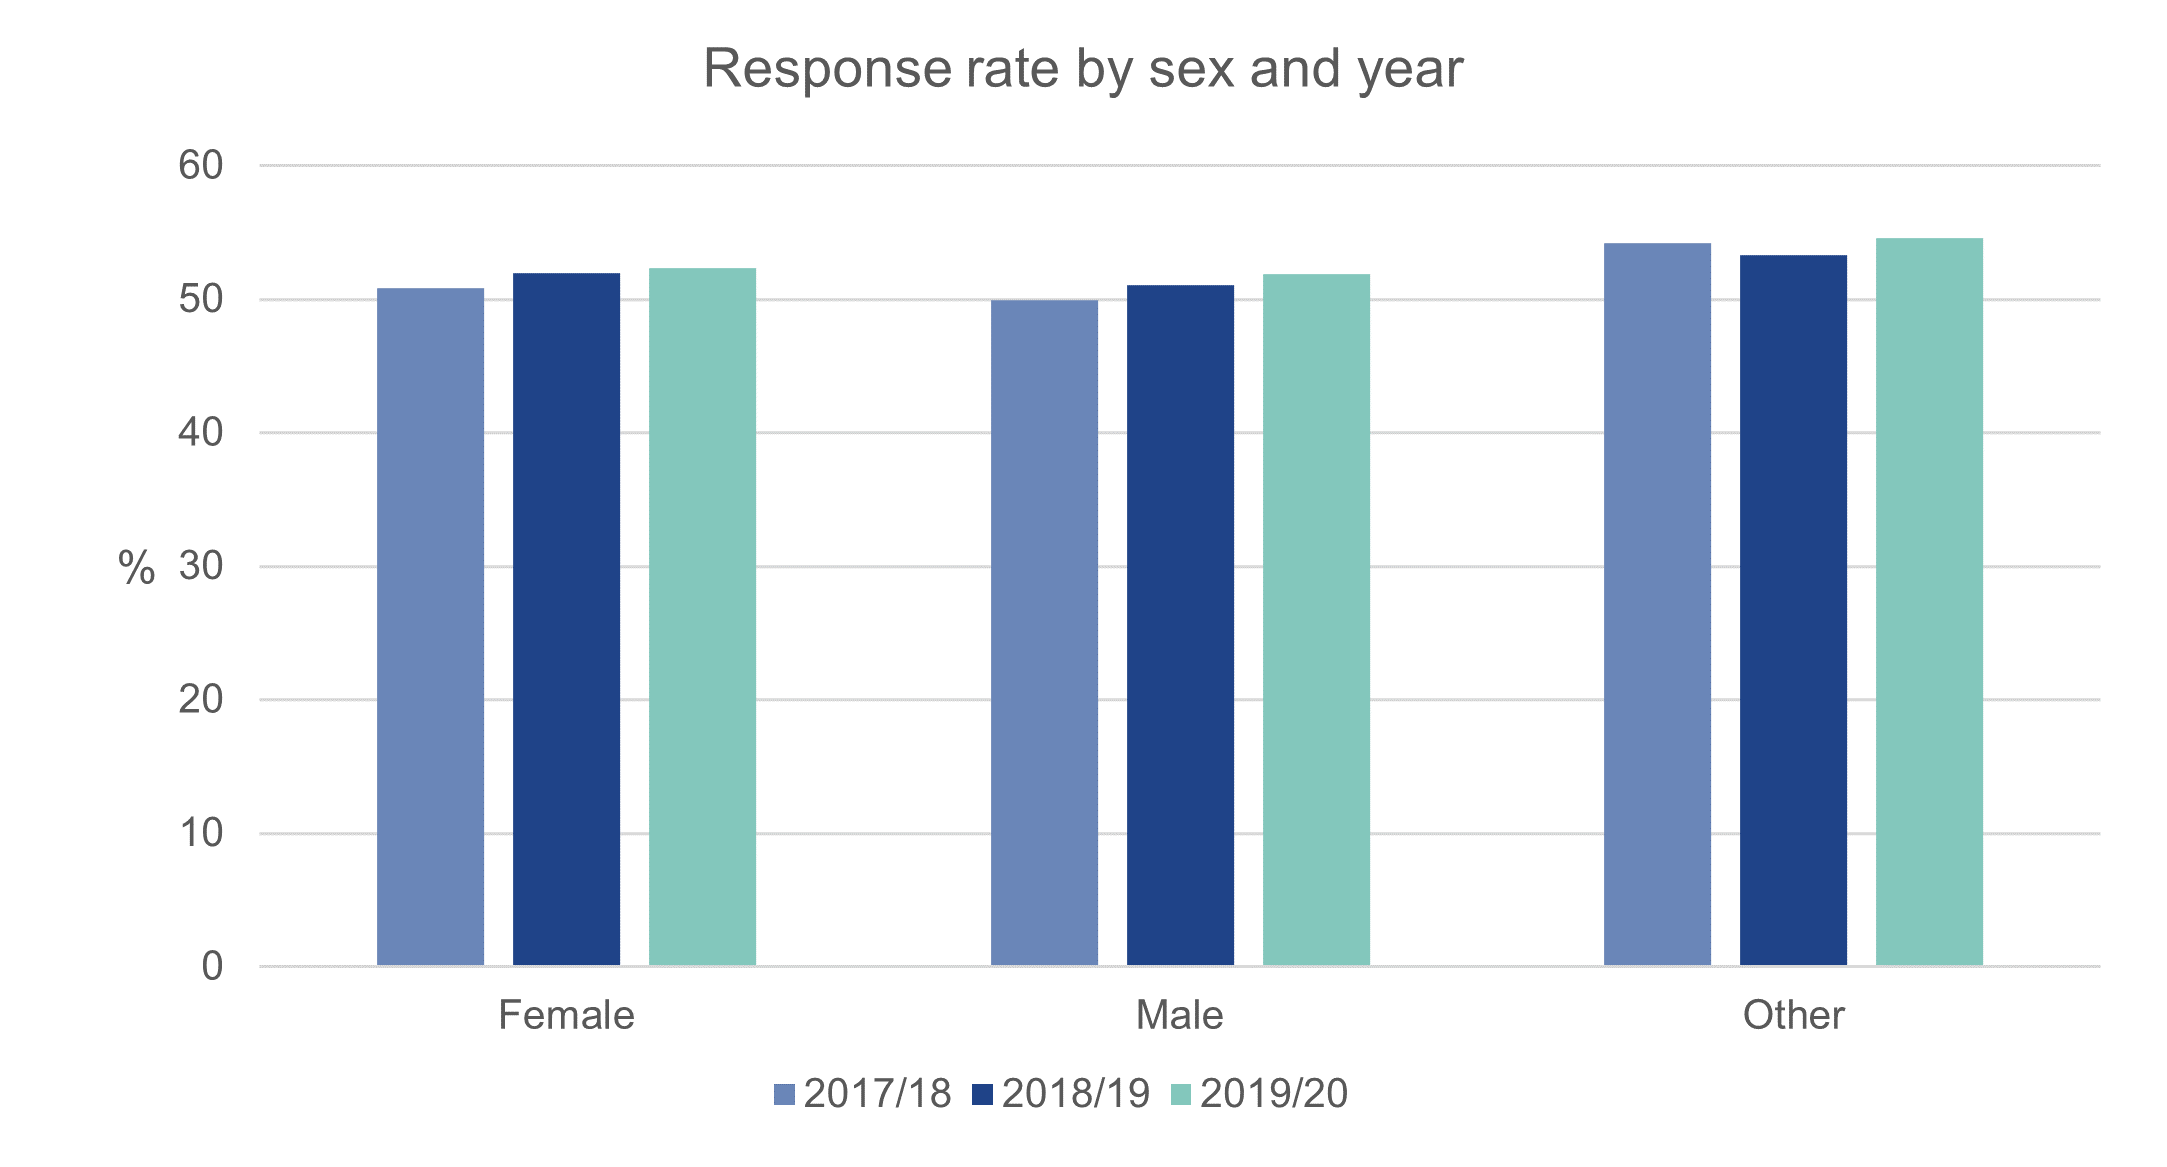 there is very little difference between response rates for male and female graduates (slightly higher for females)